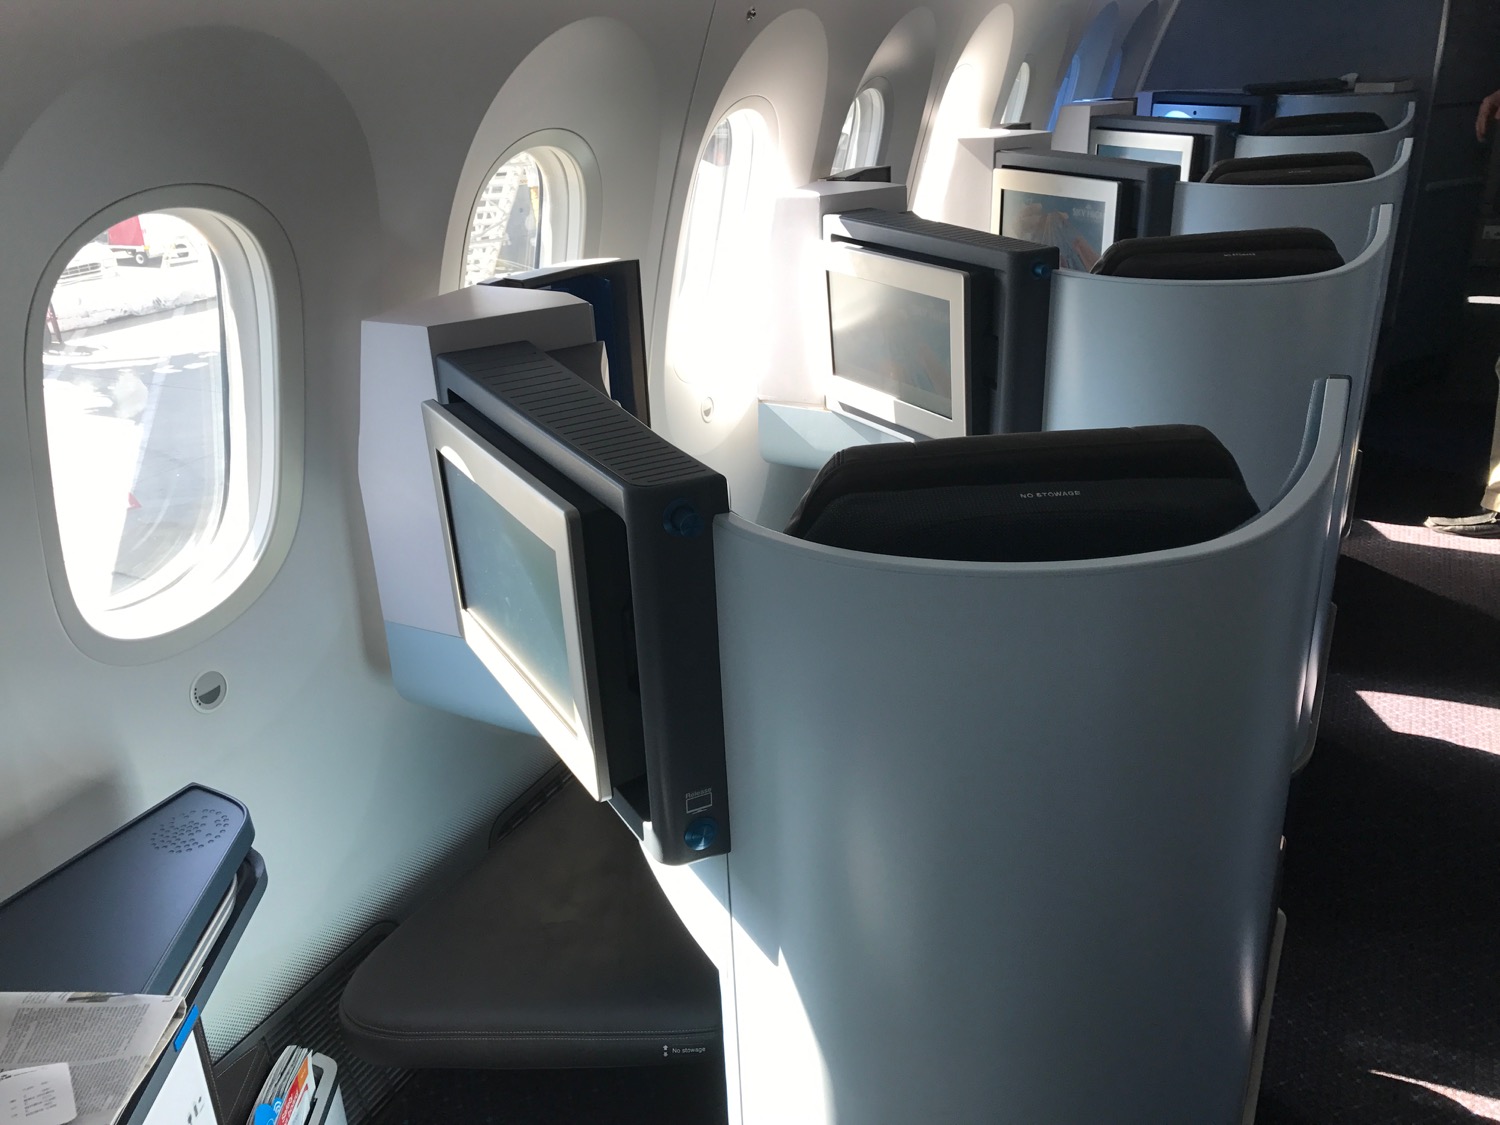 KLM 787 Business Class Review - 17